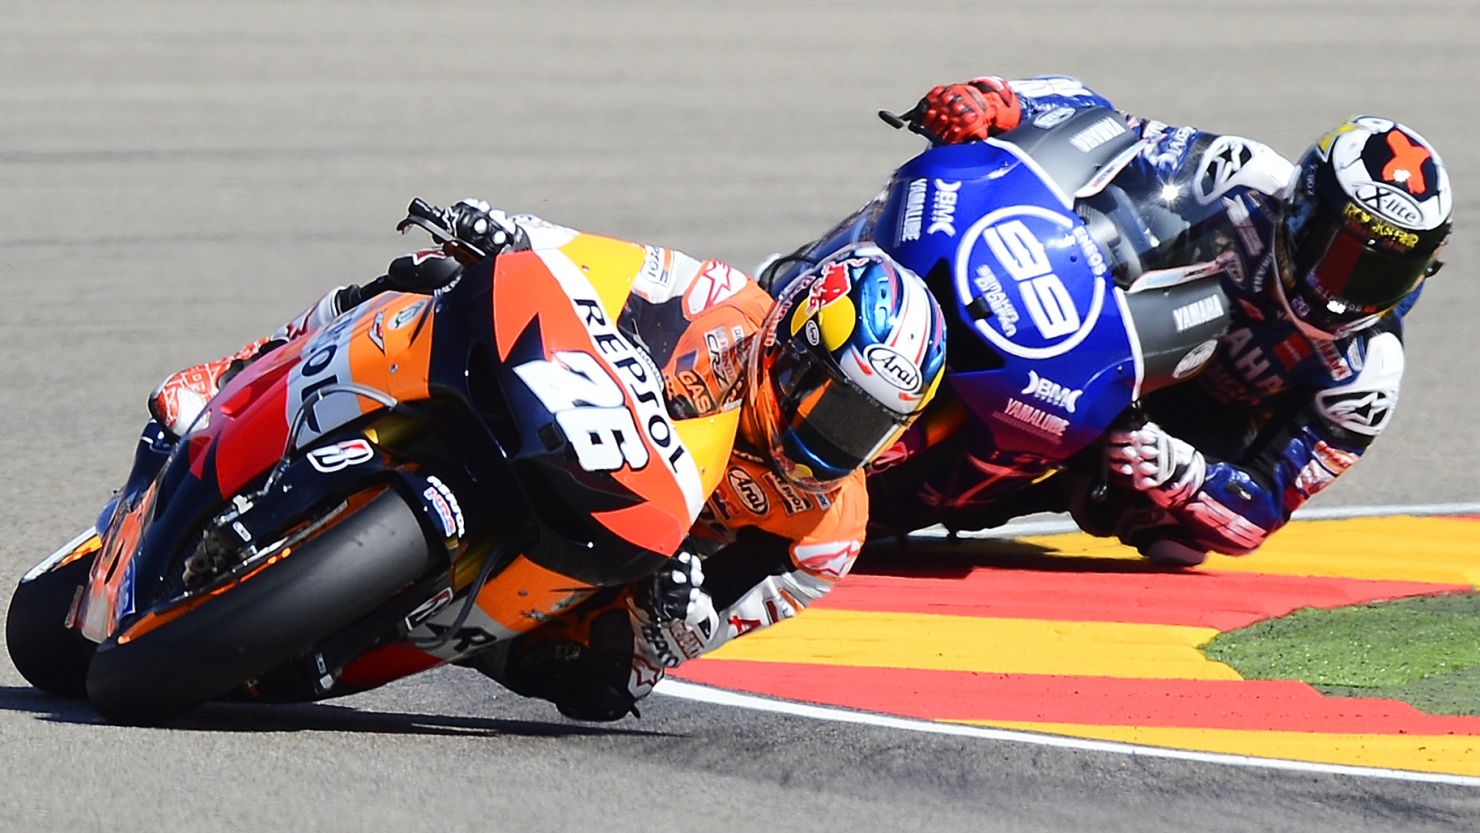  Dani Pedrosa claimed a vital victory at the Aragon GP after beating chief title rival Jorge Lorenzo.